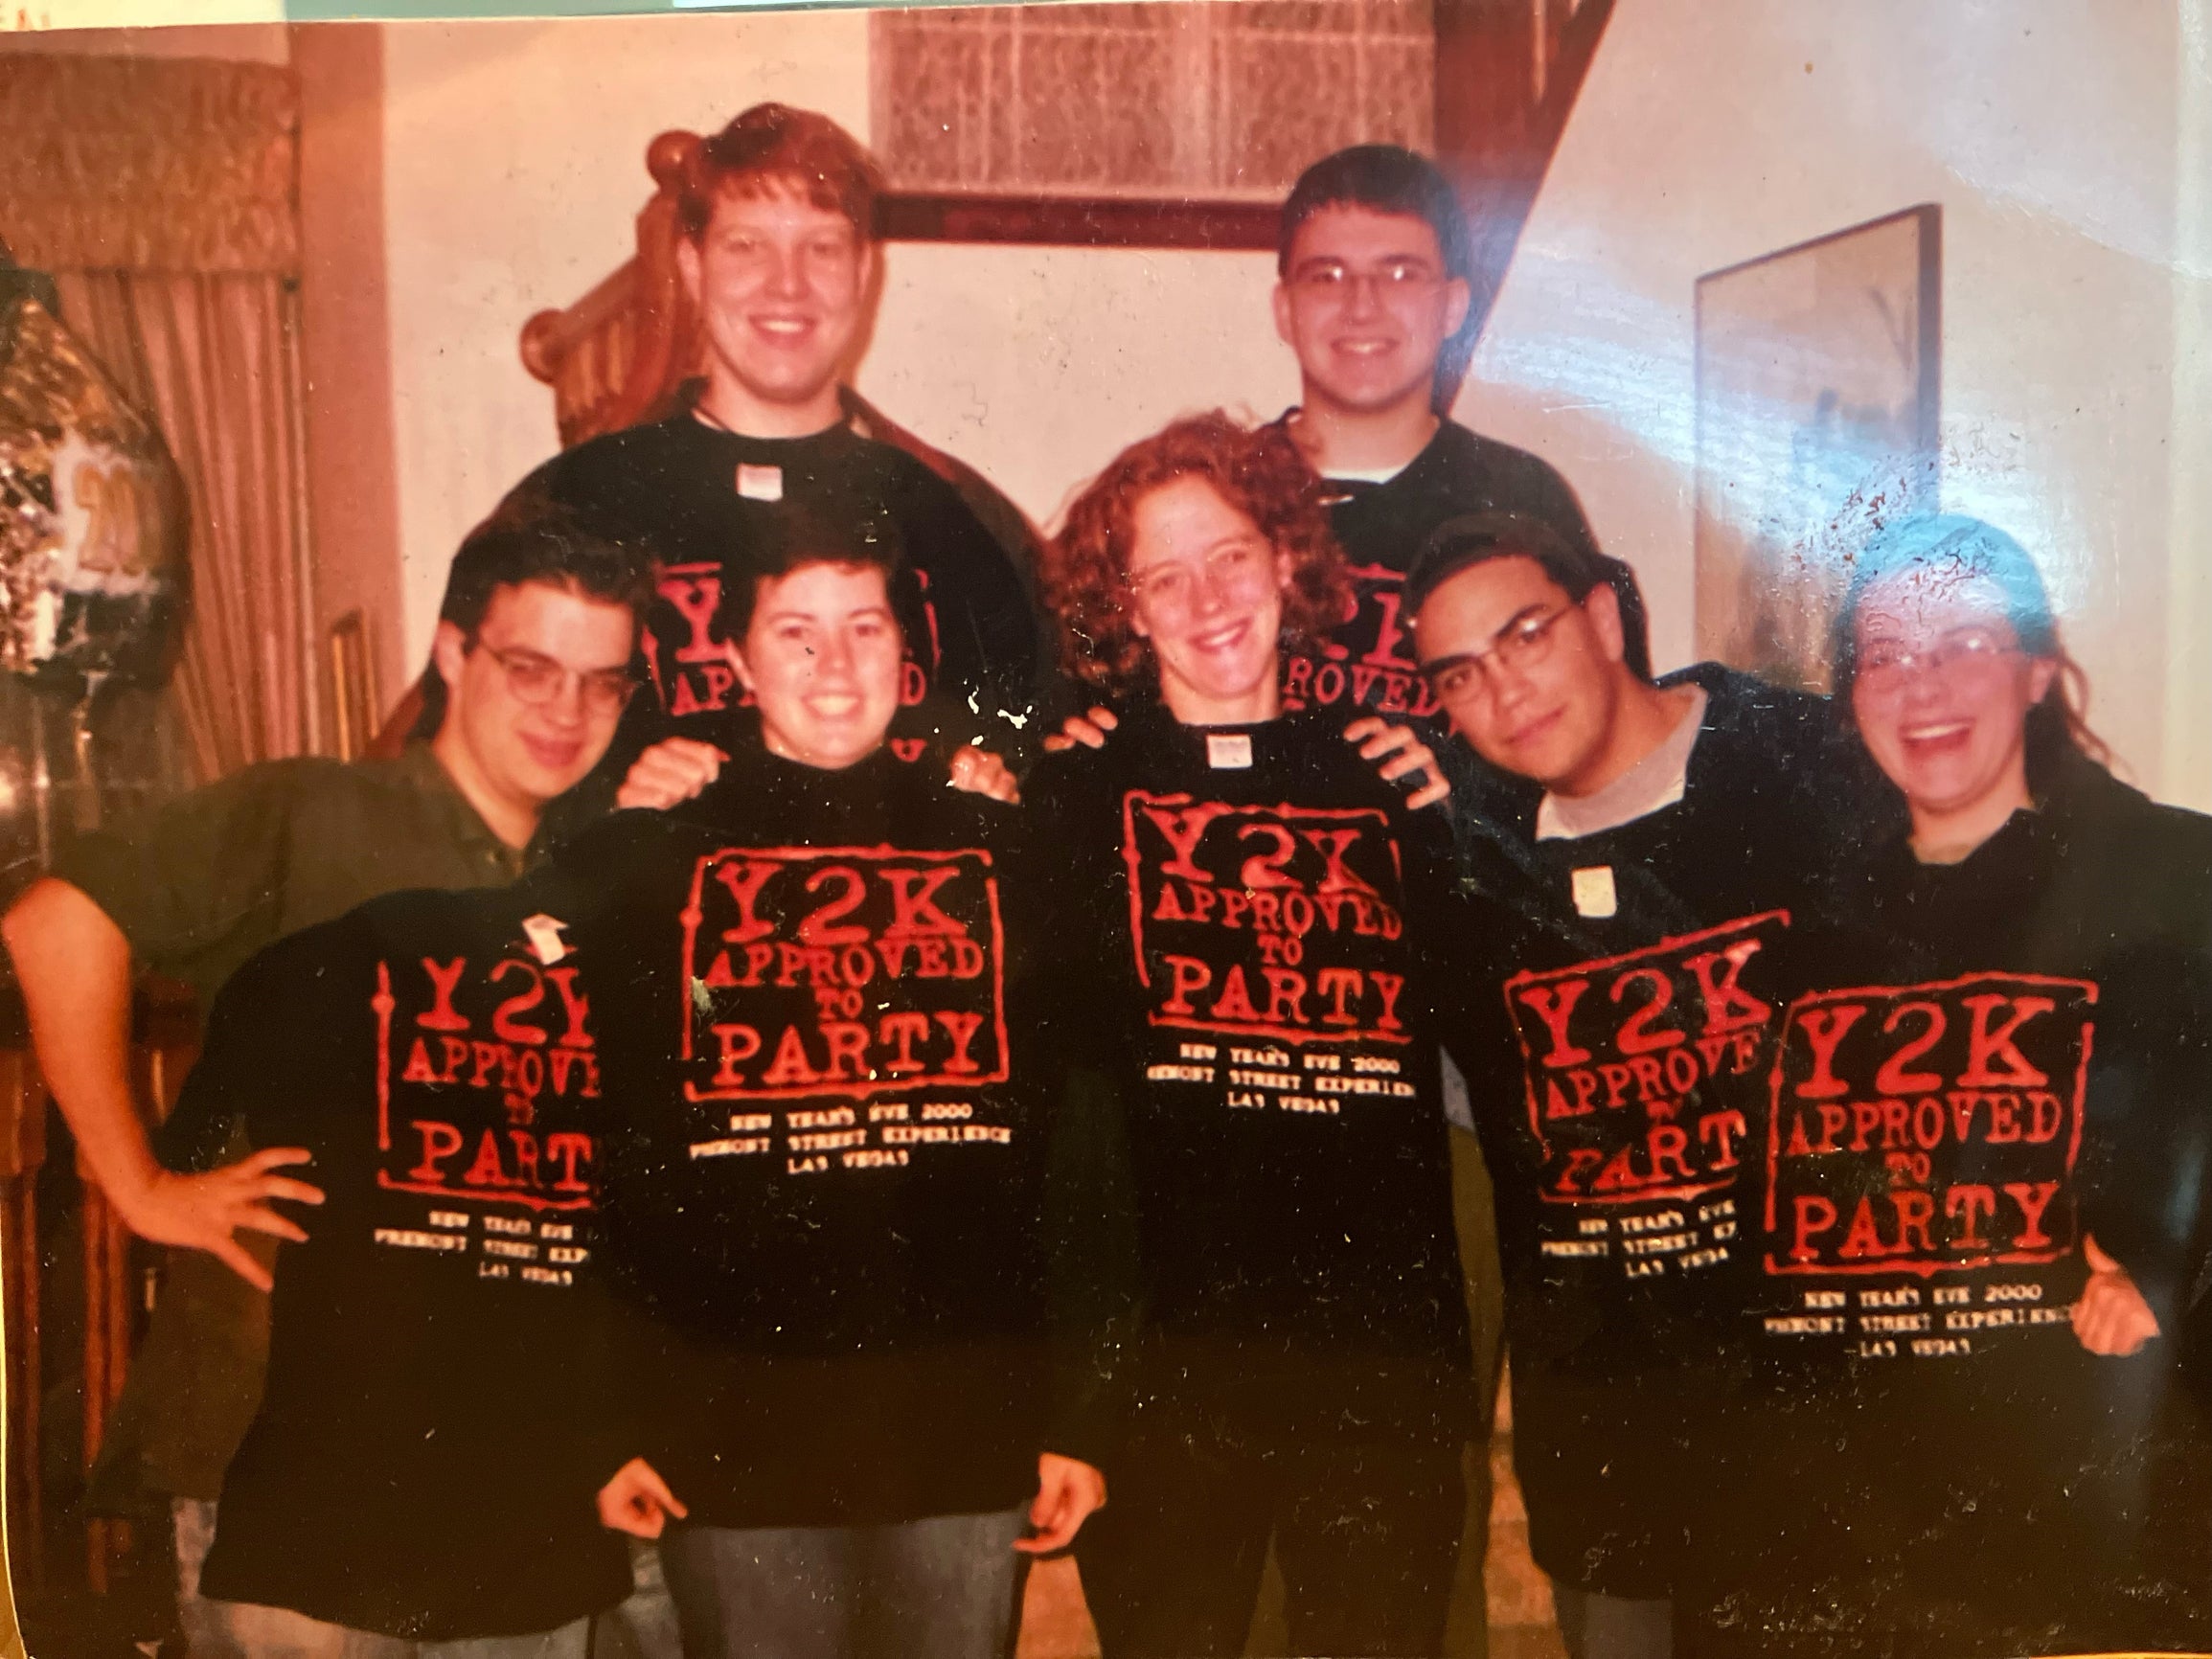 The original seven Weiss college students who first trekked to The Price is Right in 2000.